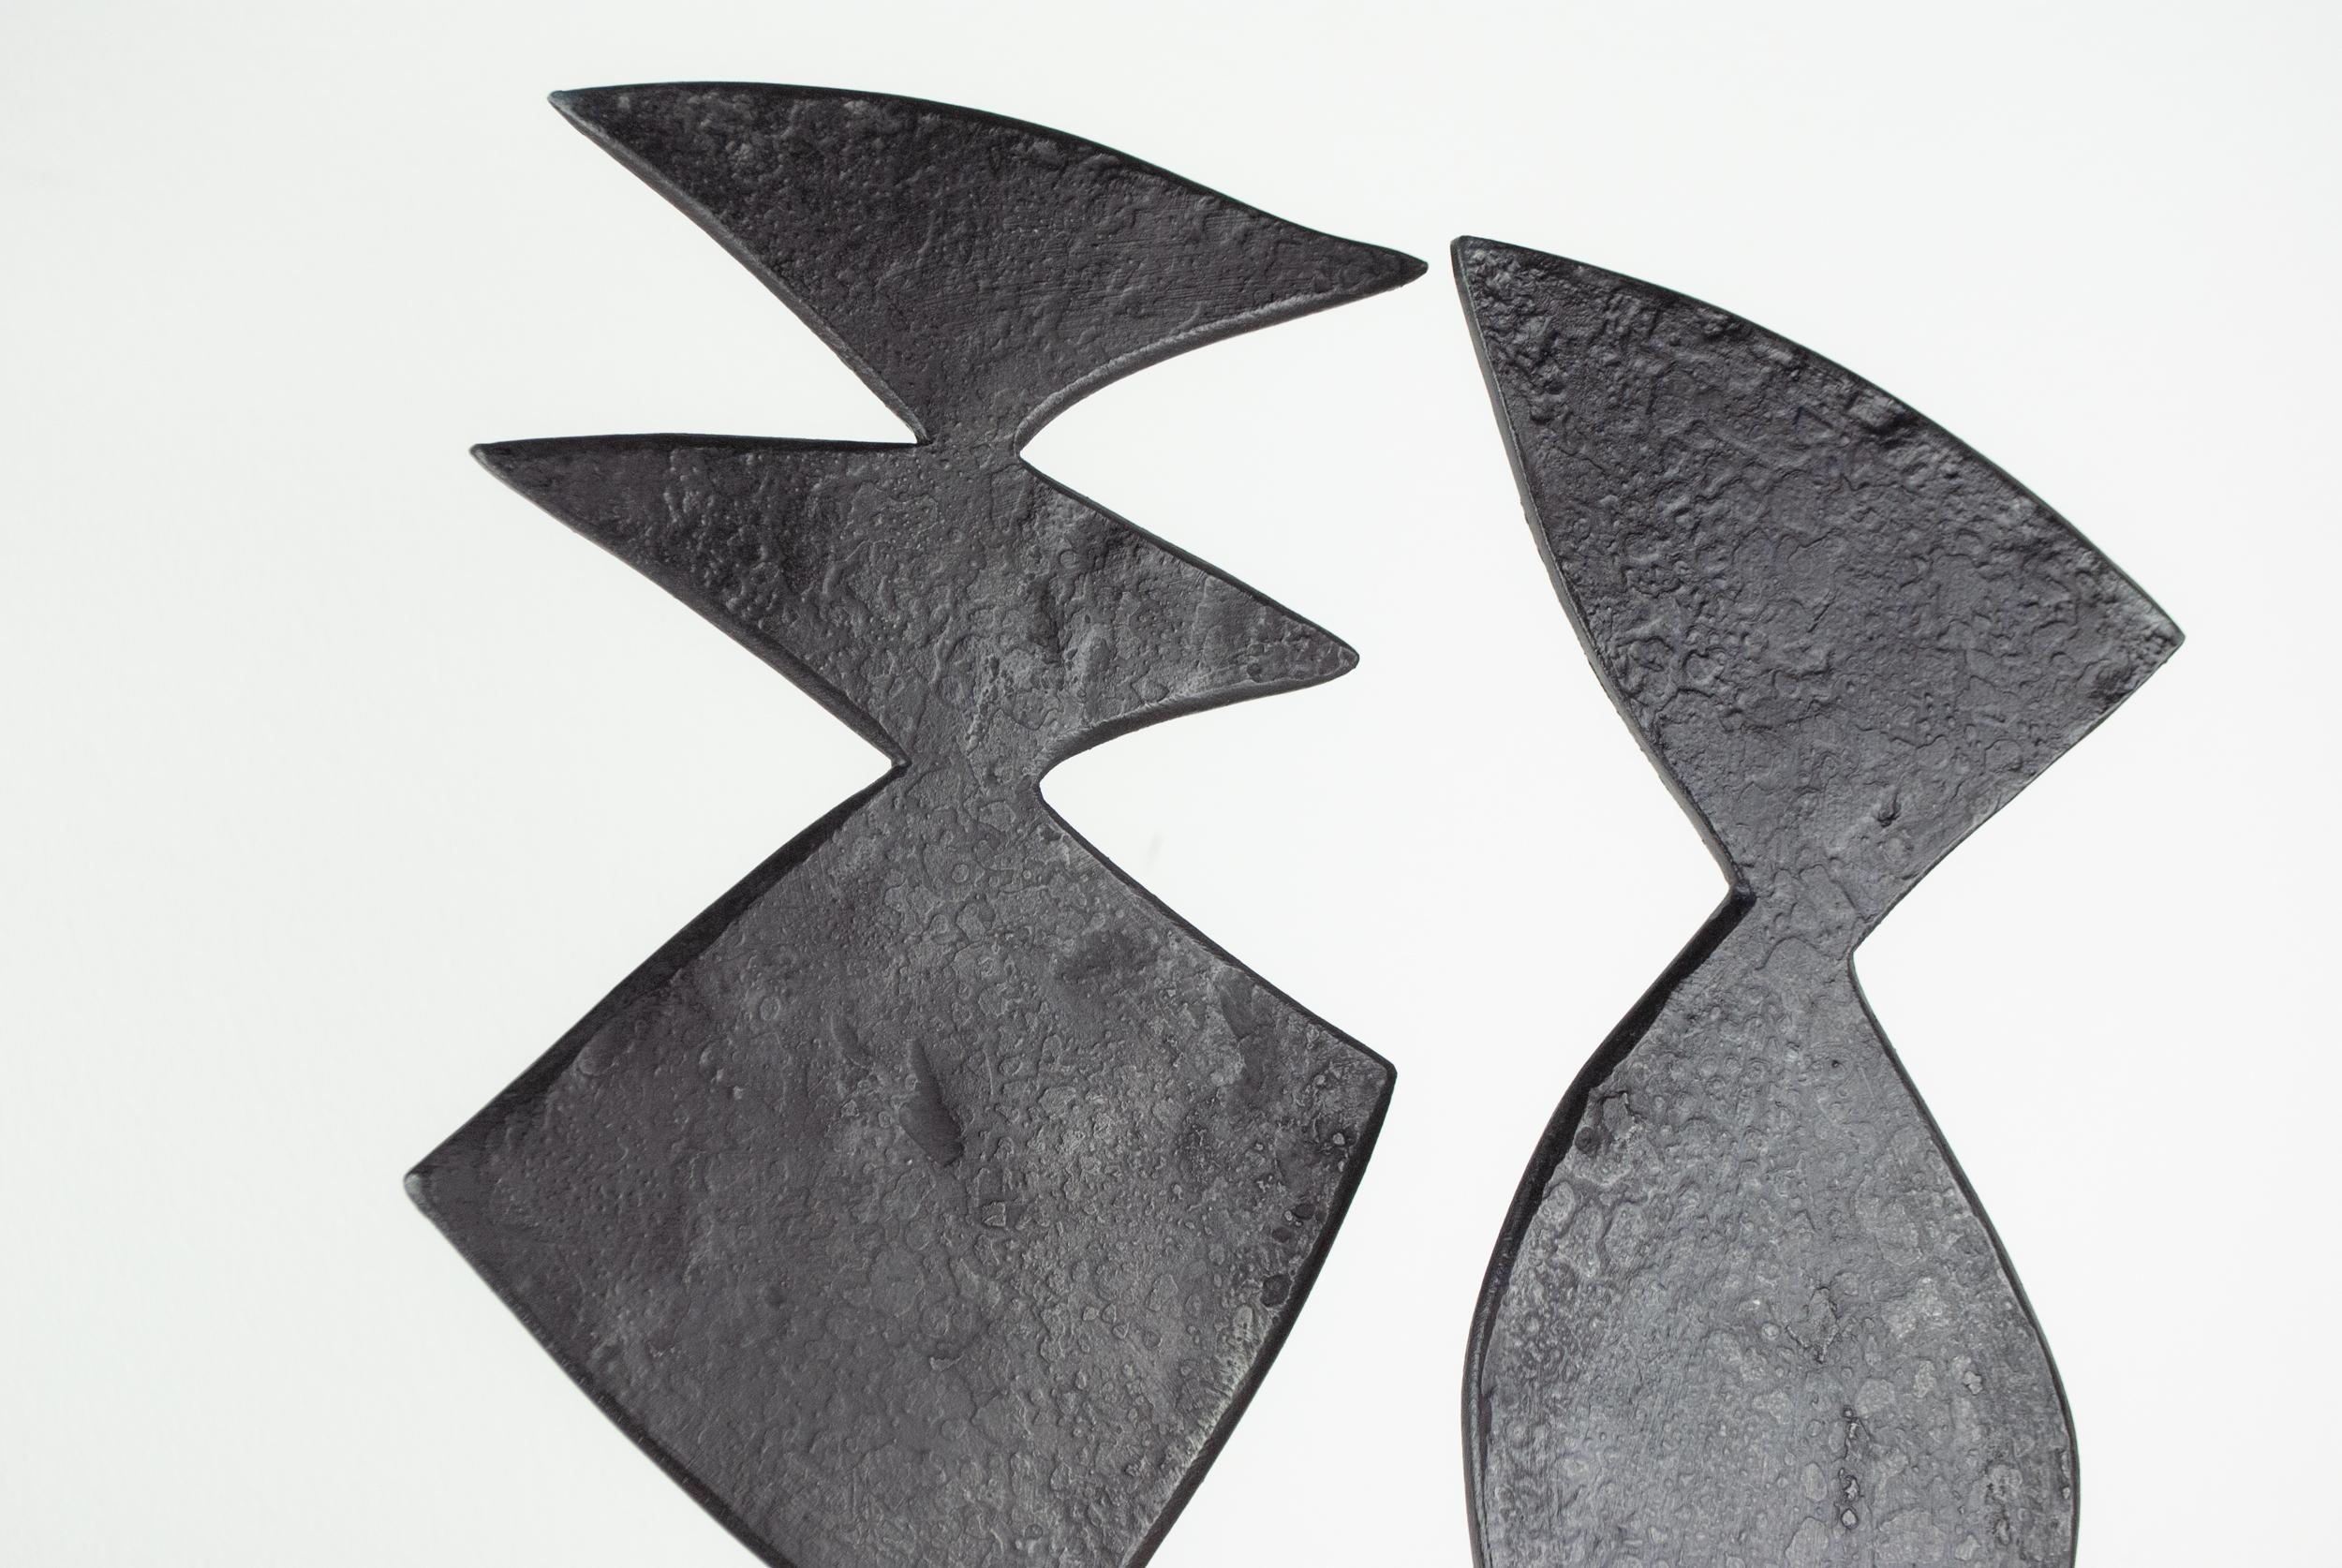 Modern Contemporary Black Forged Steel Sculpture Inspired by H. Bertoia - Two Forms 03 For Sale